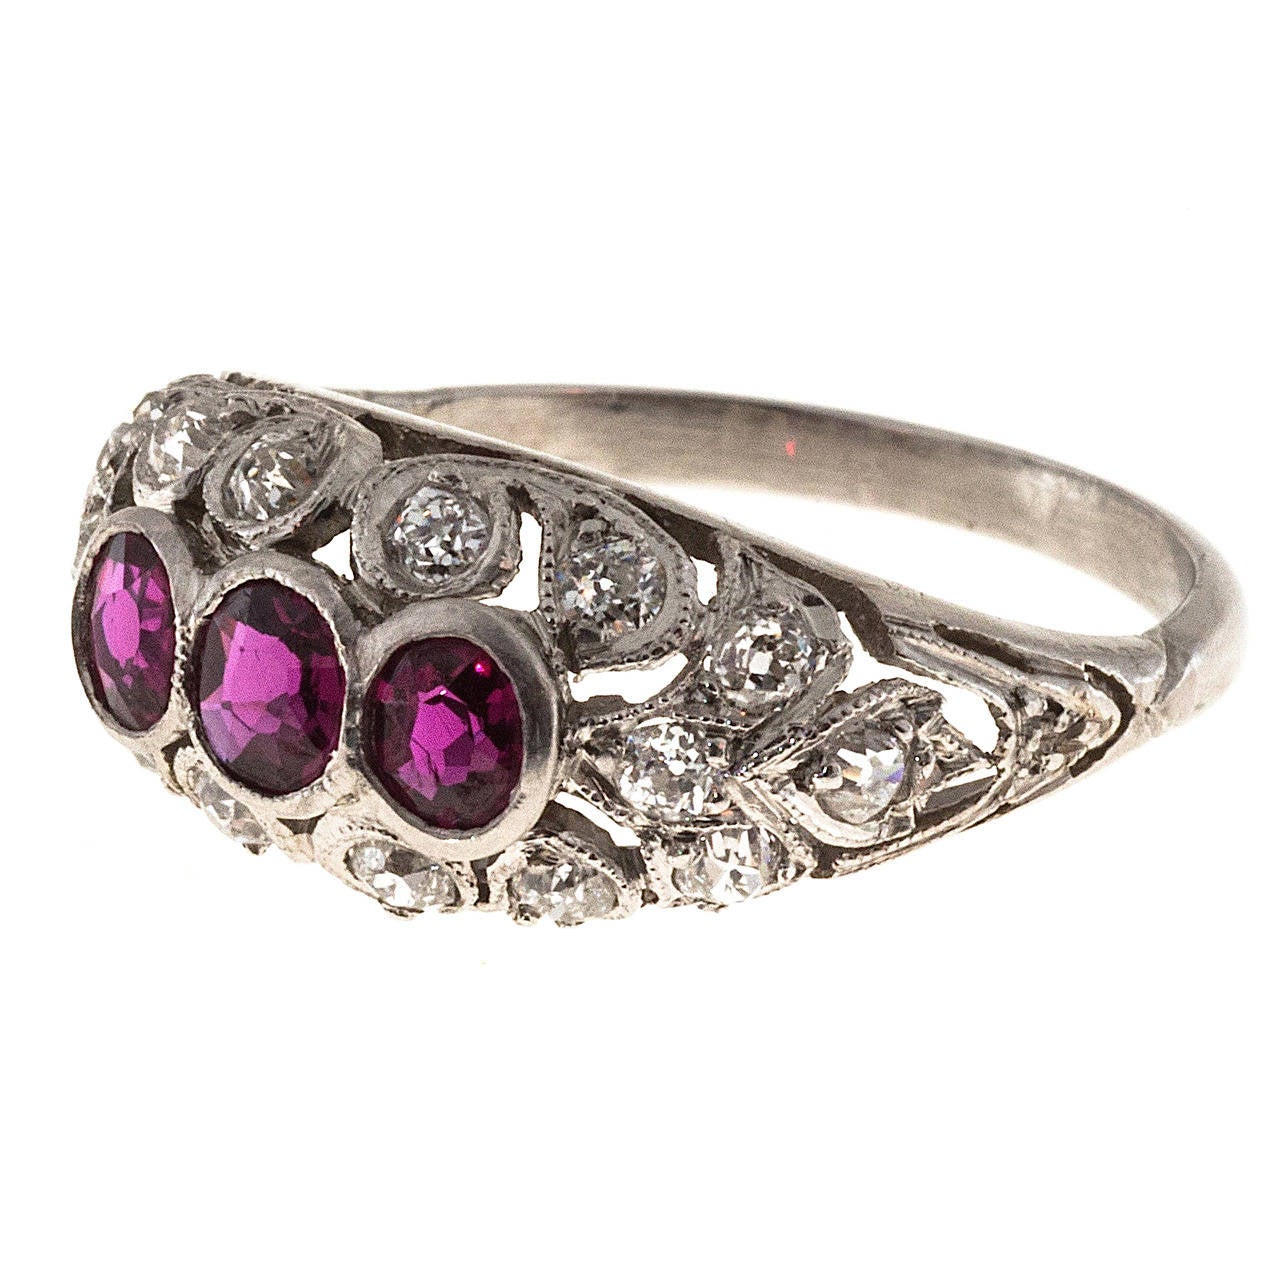 Bright red certified natural Ruby and diamond dome ring. Edwardin their original 1910 dome ring. 3 rubies surrounded by 16 diamonds in a platinum setting. 

3 old European cut natural bright gem pure red Rubies, approx. total weight .75cts, VS-SI,